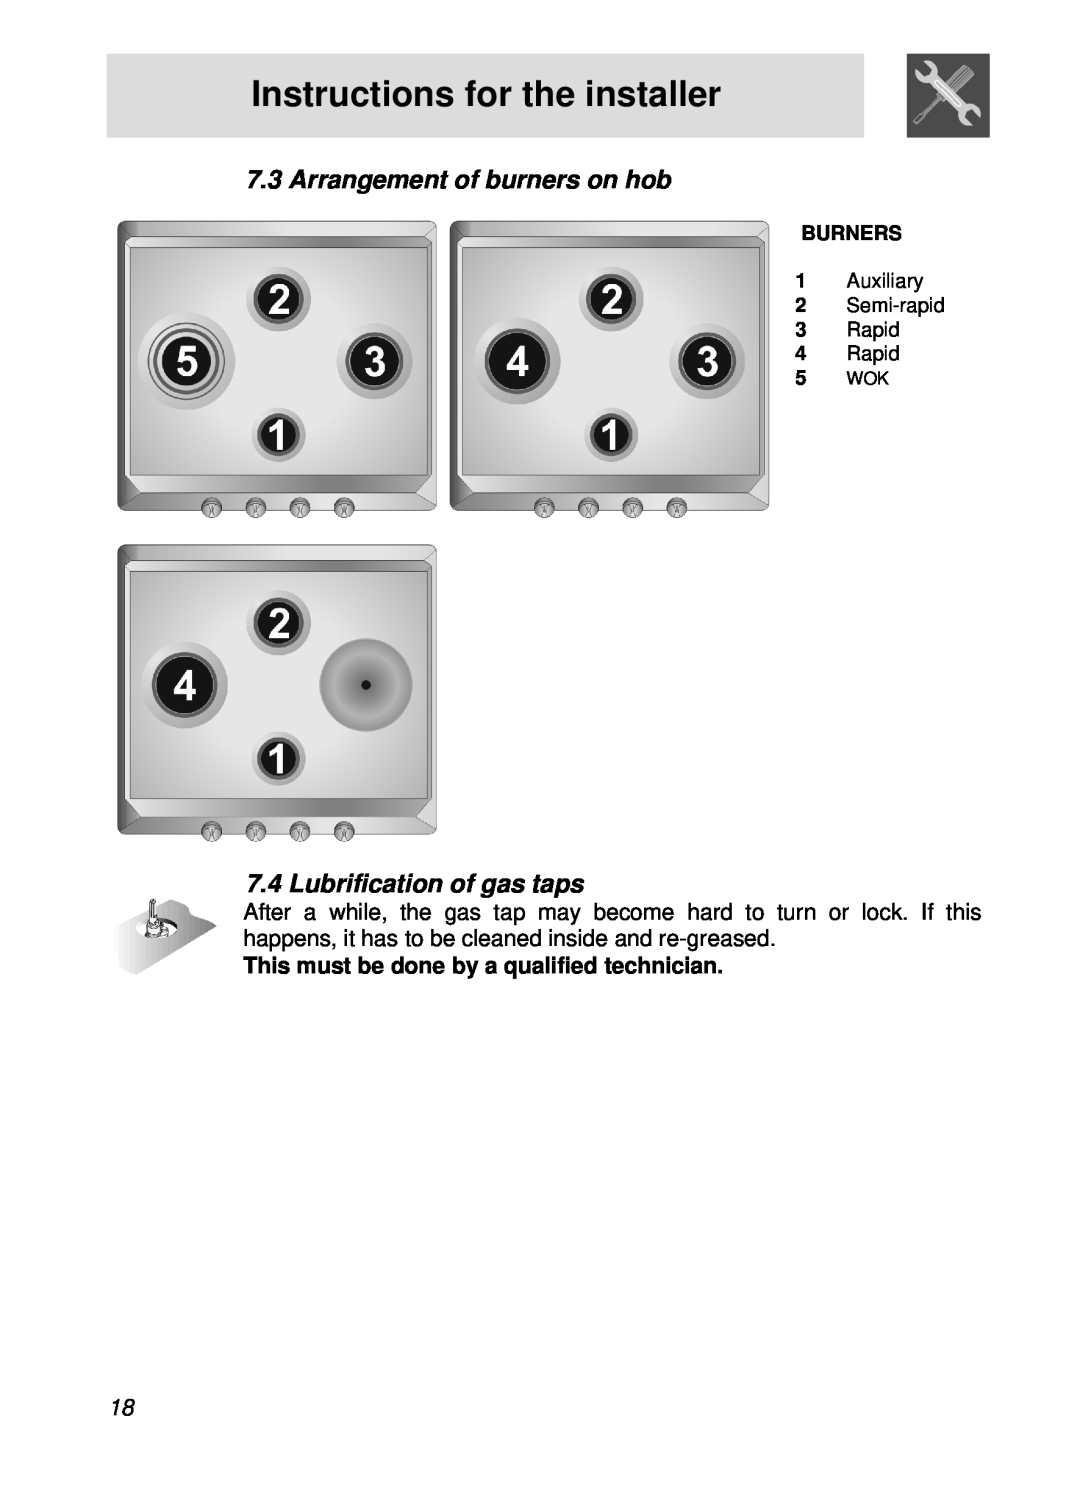 Smeg CIR60X Arrangement of burners on hob, Lubrification of gas taps, Instructions for the installer, Burners, Auxiliary 